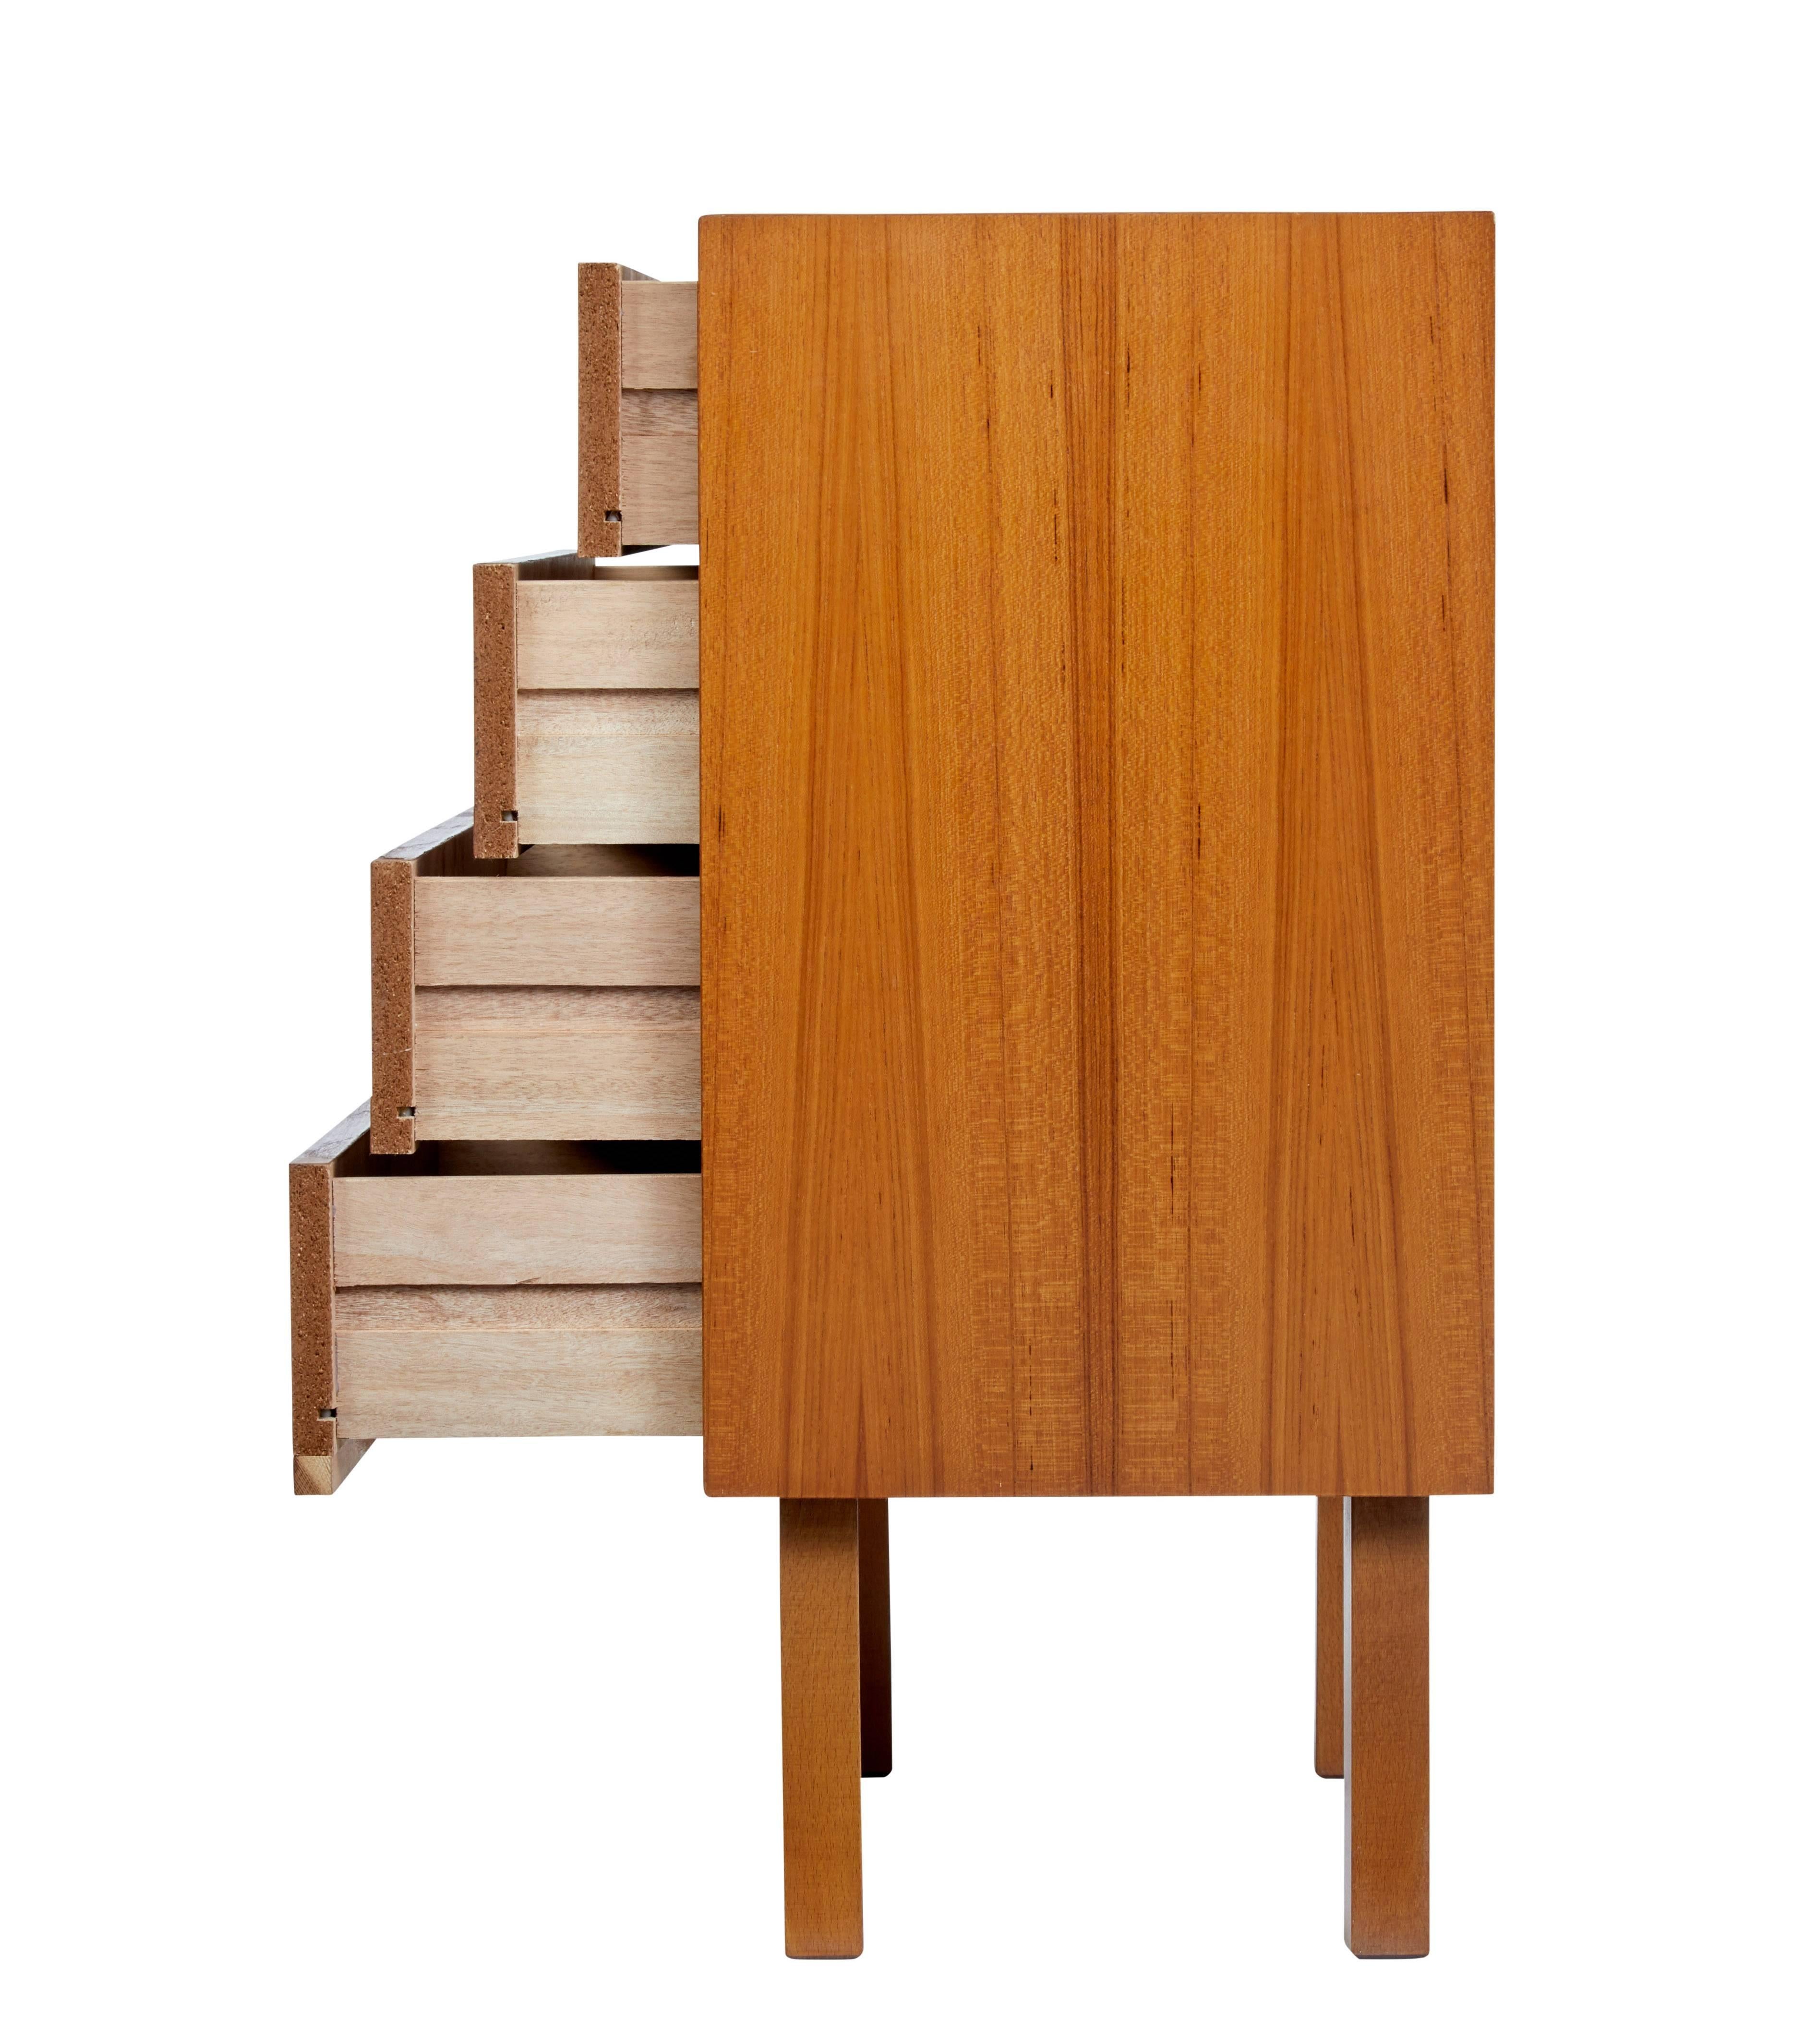 Stylish 1960's Scandinavian modern design chest of drawers.

4 drawers with turned wood handles. Standing on  straight legs.

Minor surface marks to top surface and to top drawer.